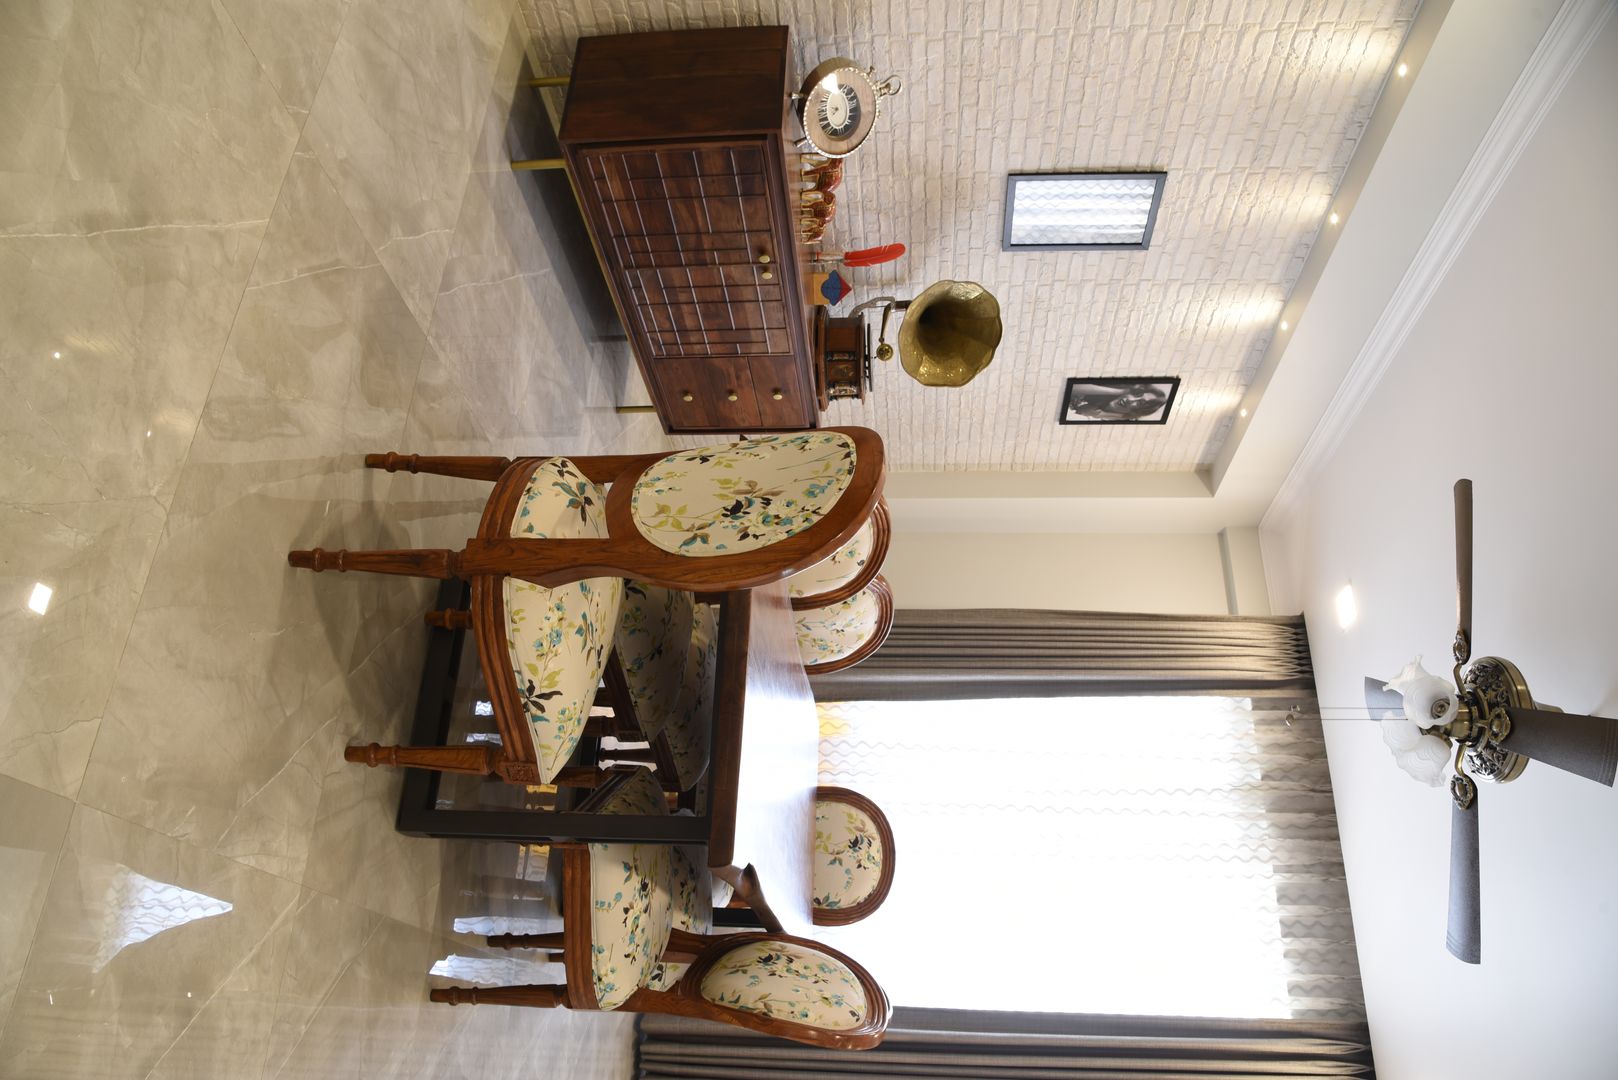 Dining room- Apartment on Golf course extension road, Gurugram The Workroom 餐廳